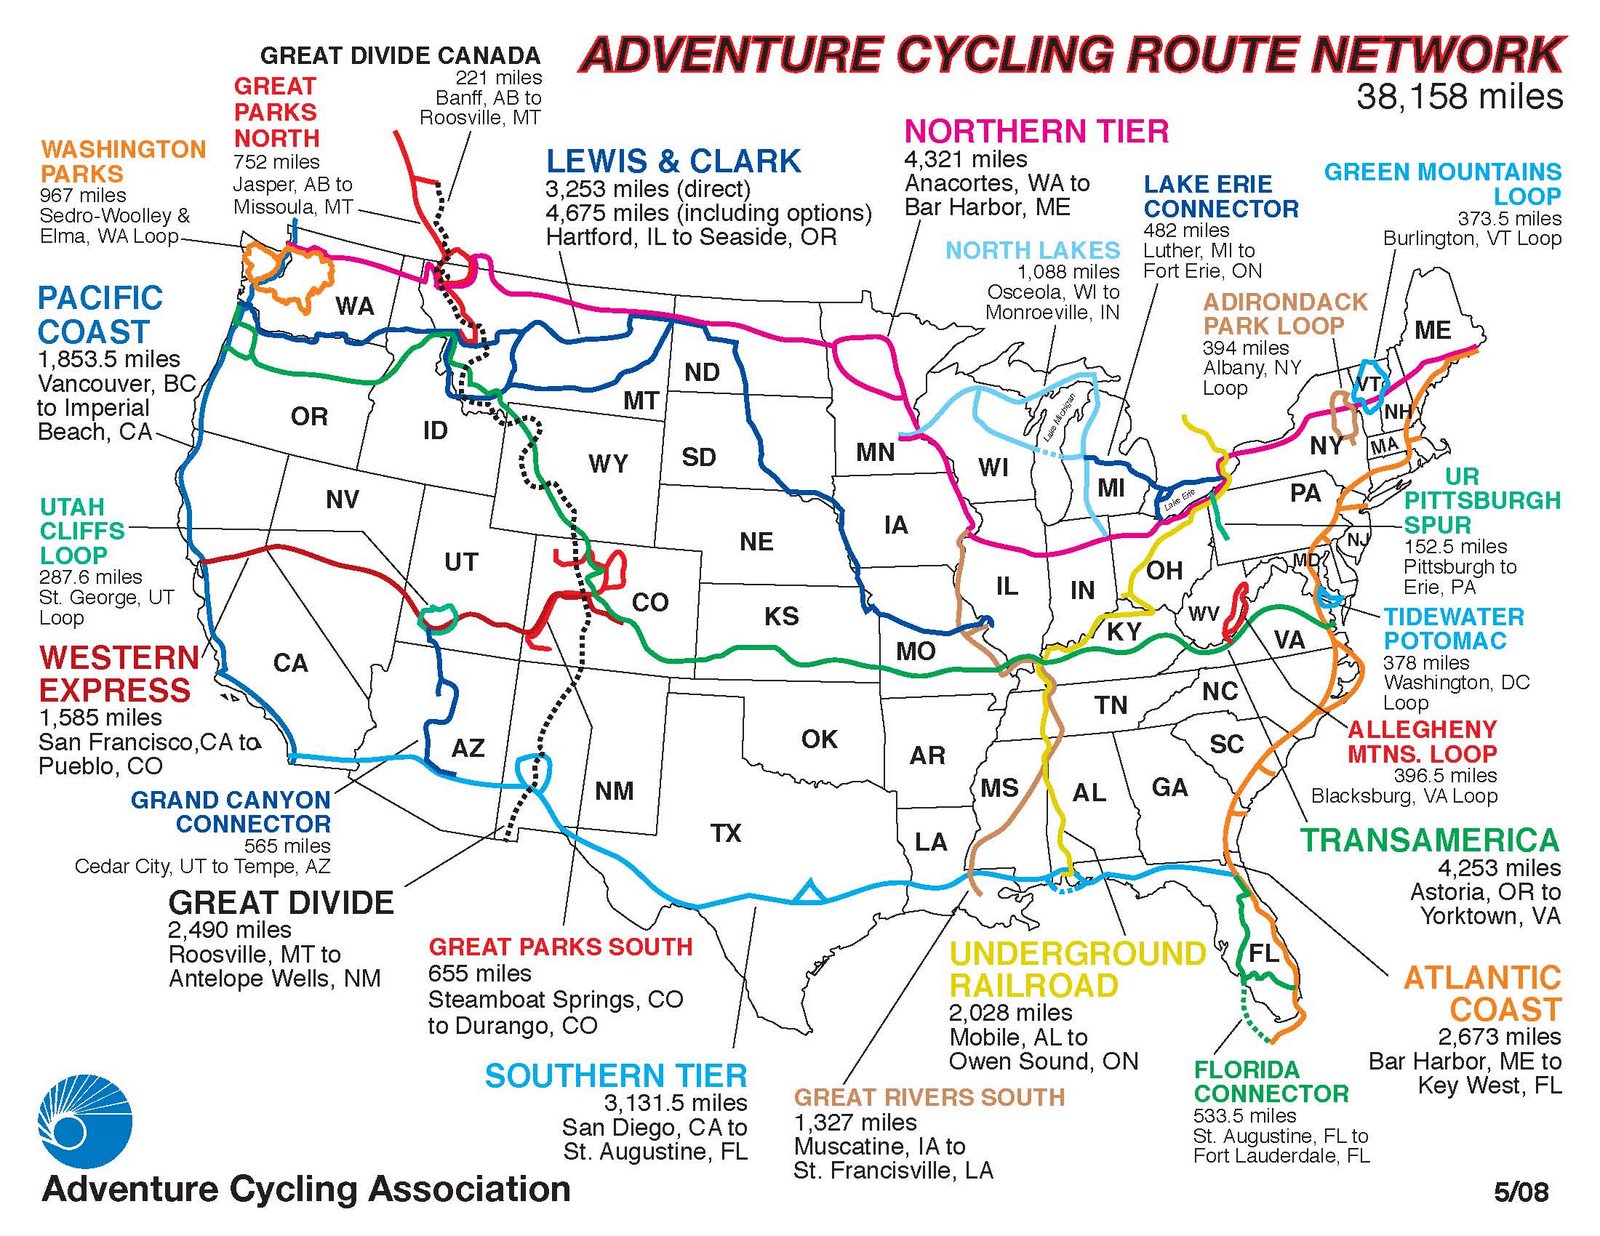 Our XC Route: Western Express Trail from San Francisco, CA to Pueblo, CO then the TransAmerica Trai